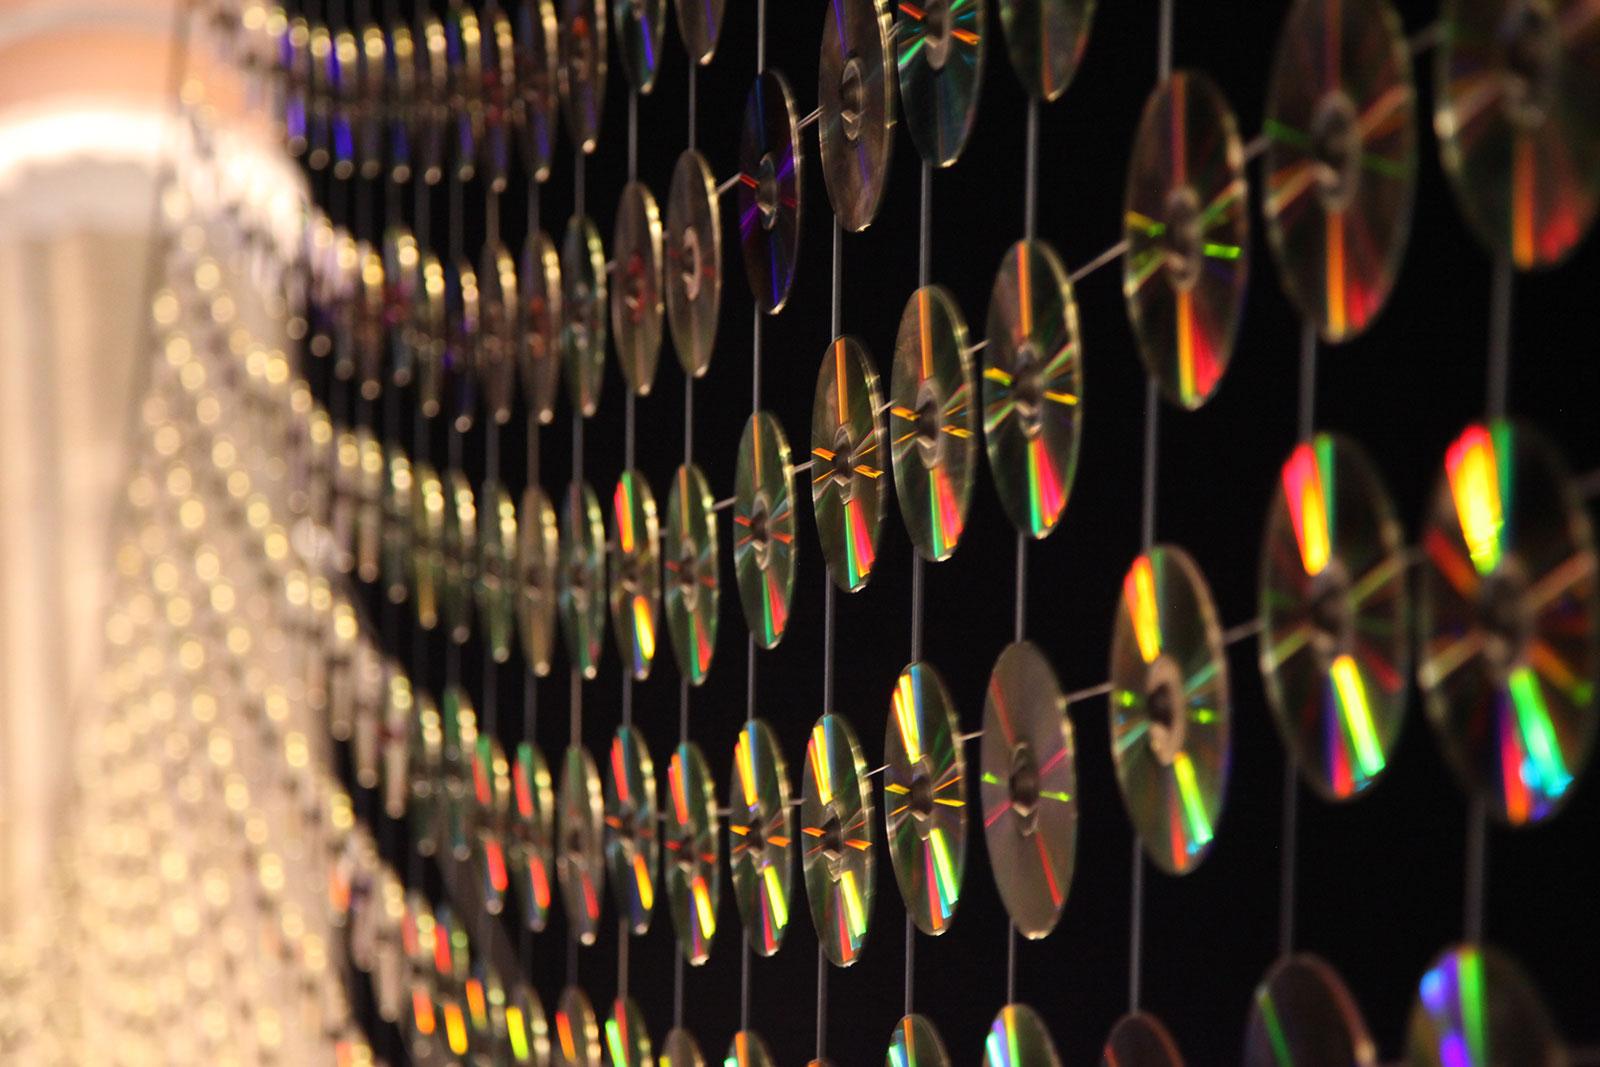 6,000 Used CDs Never Looked So Pretty